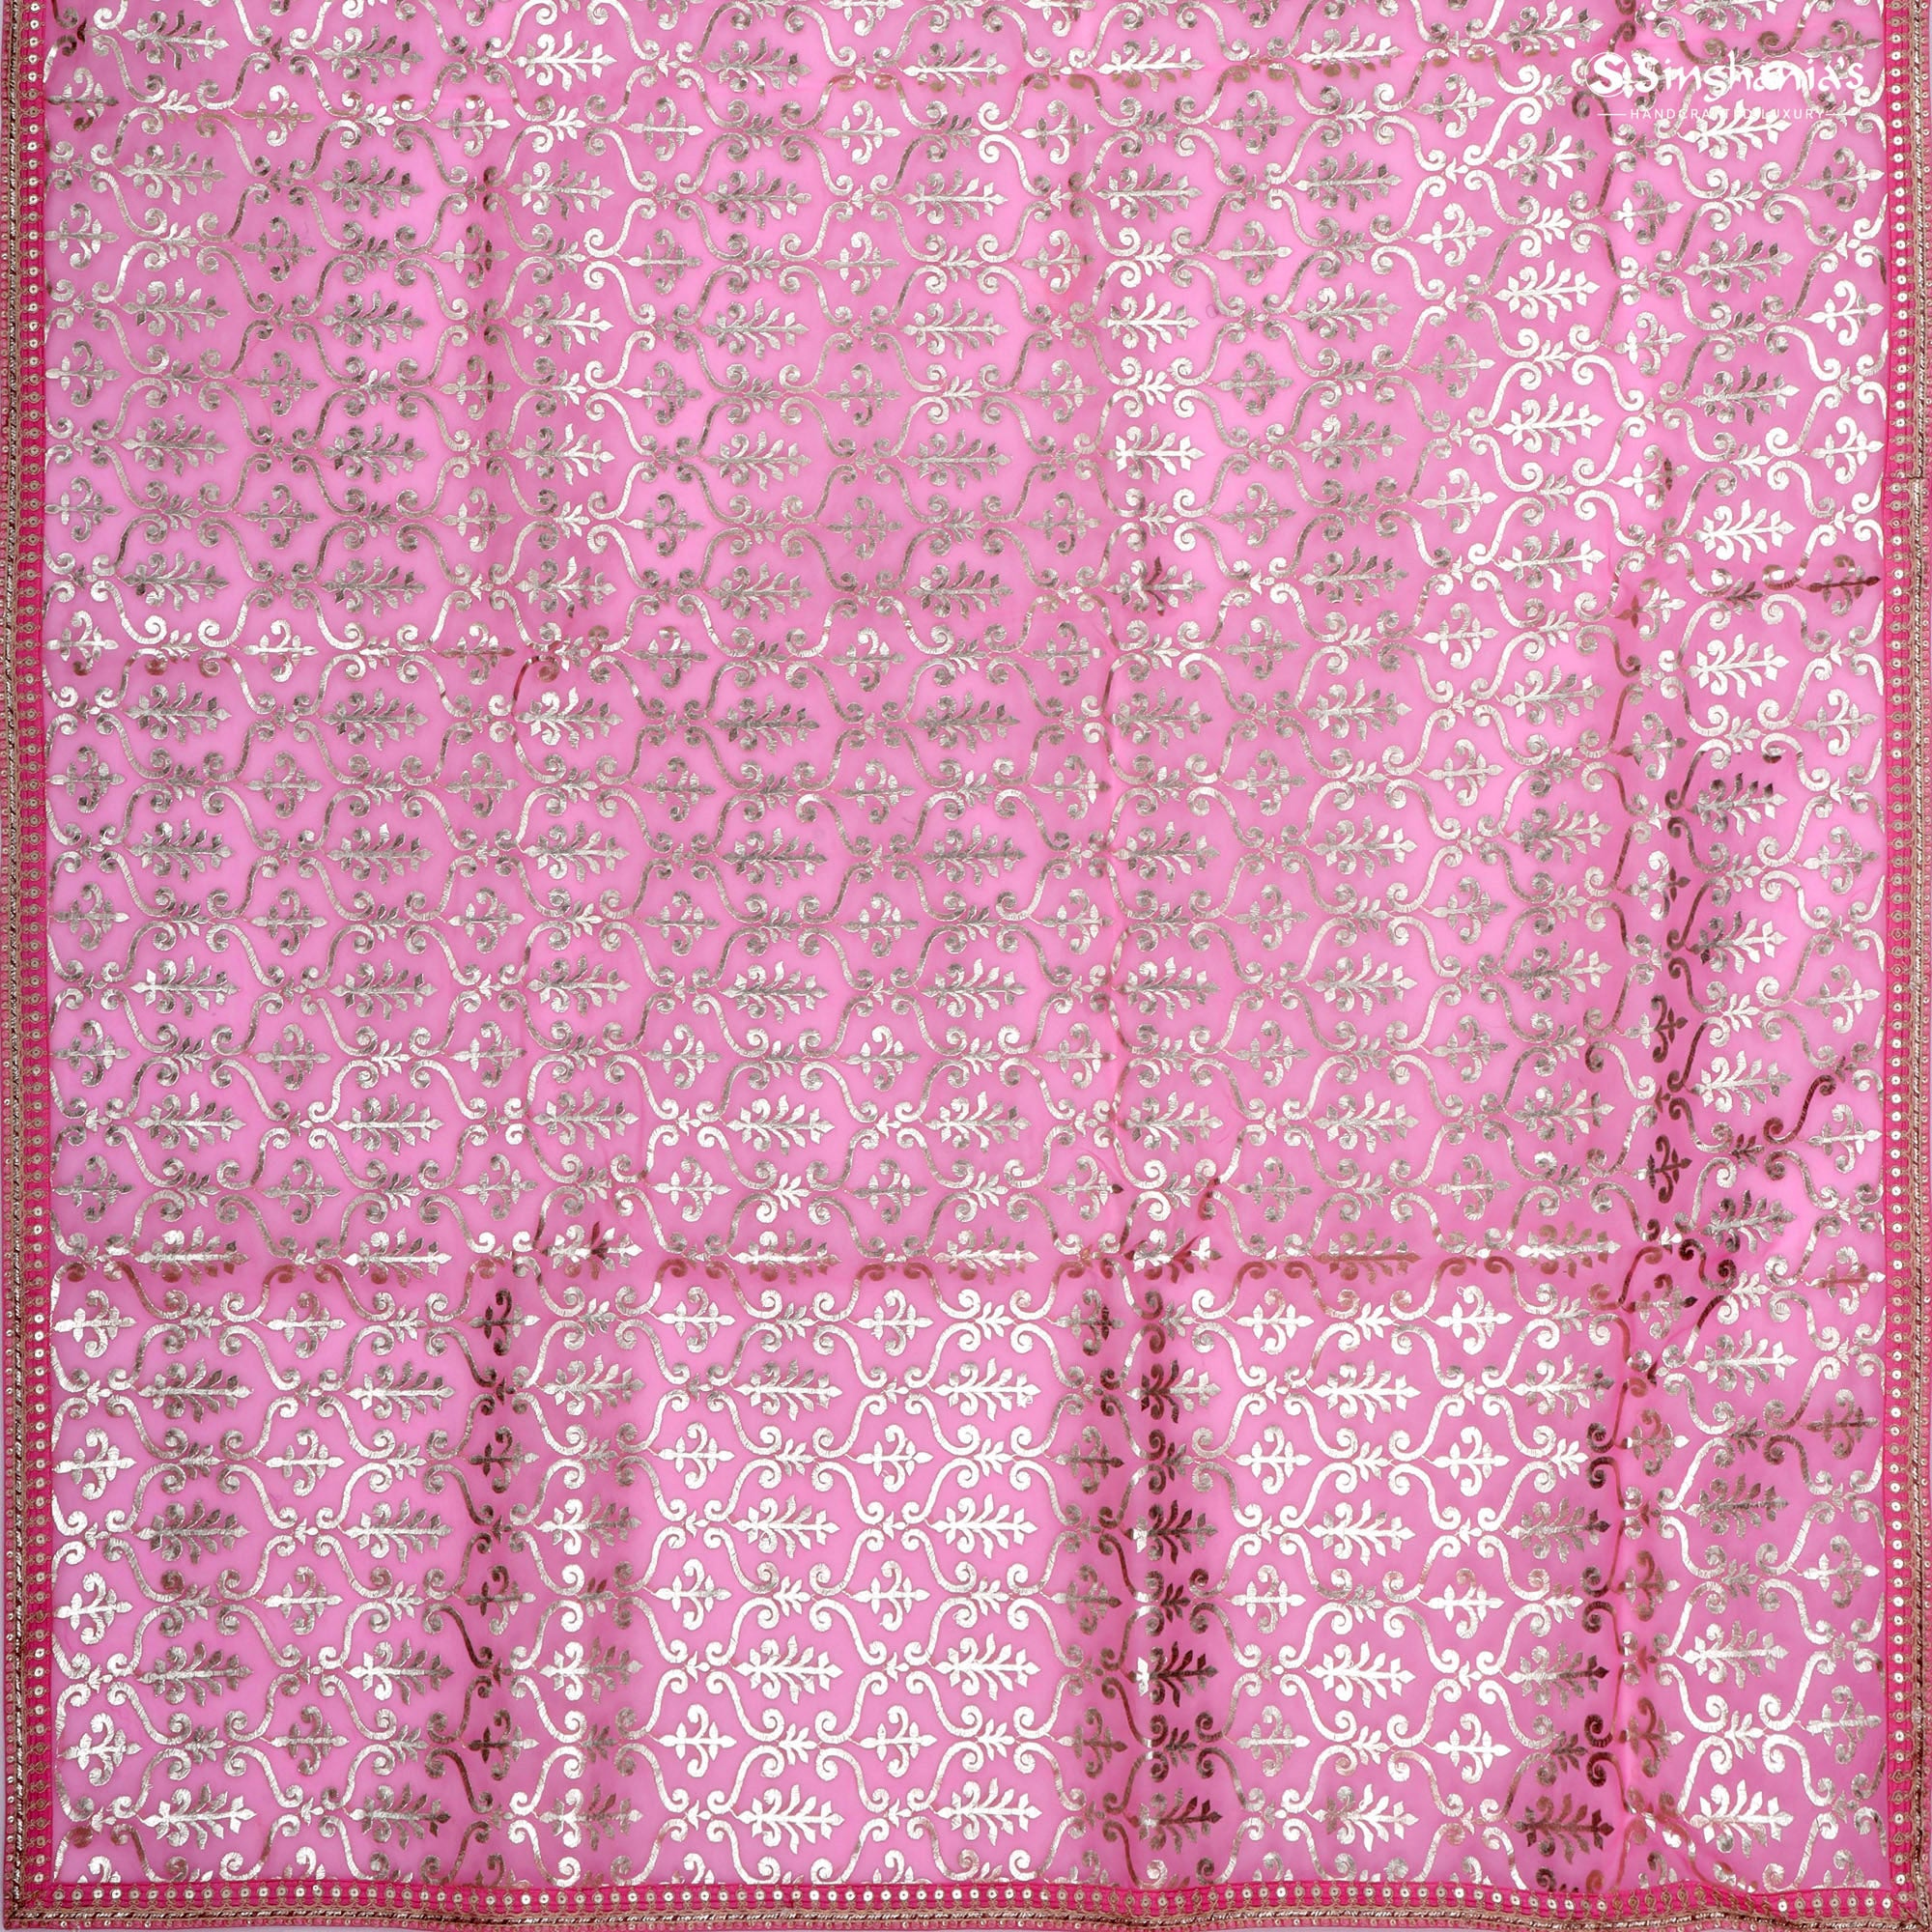 Bubblegum Pink Organza Saree With Sequin Embroidery